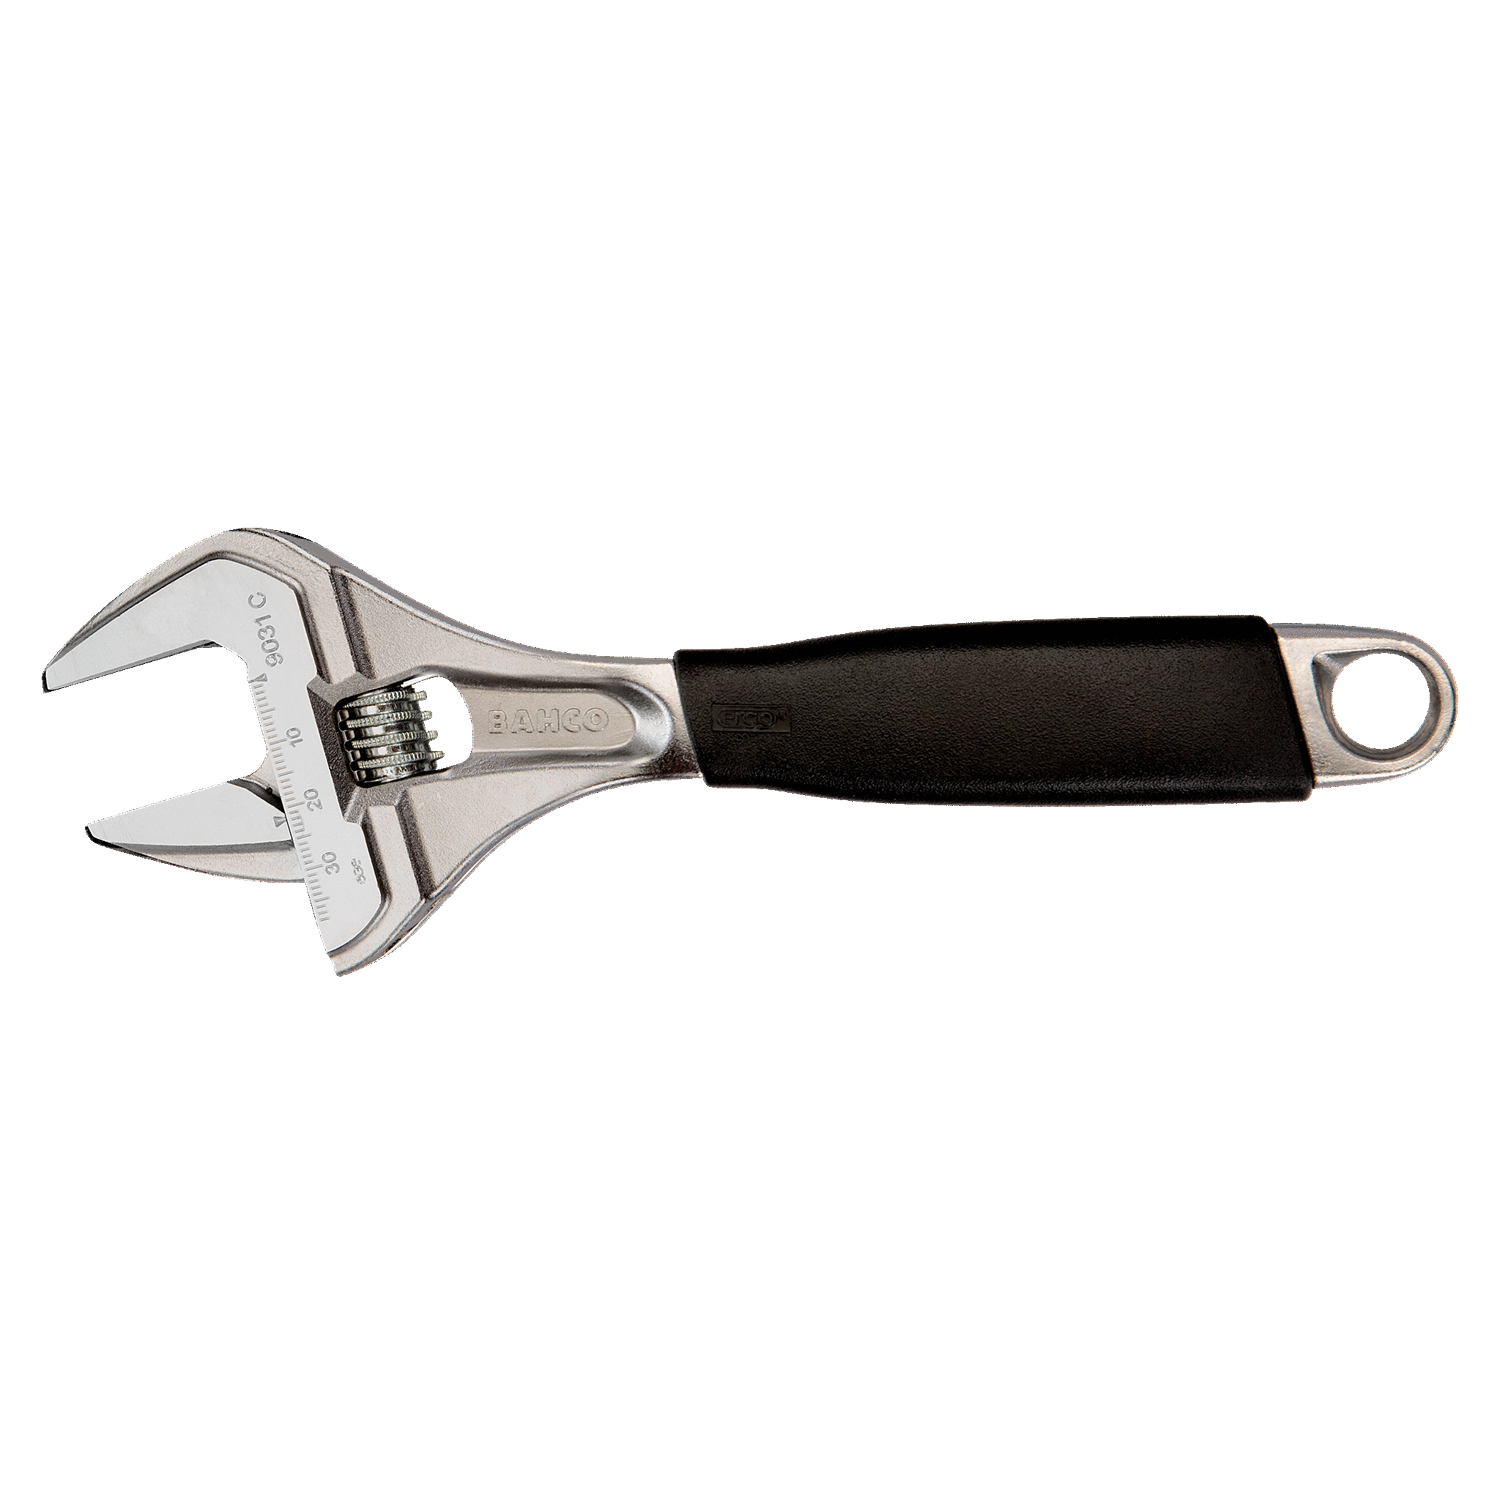 BAHCO 9029C ERGO Central Nut Adjustable Wrench 170mm - Premium Adjustable Wrench from BAHCO - Shop now at Yew Aik.